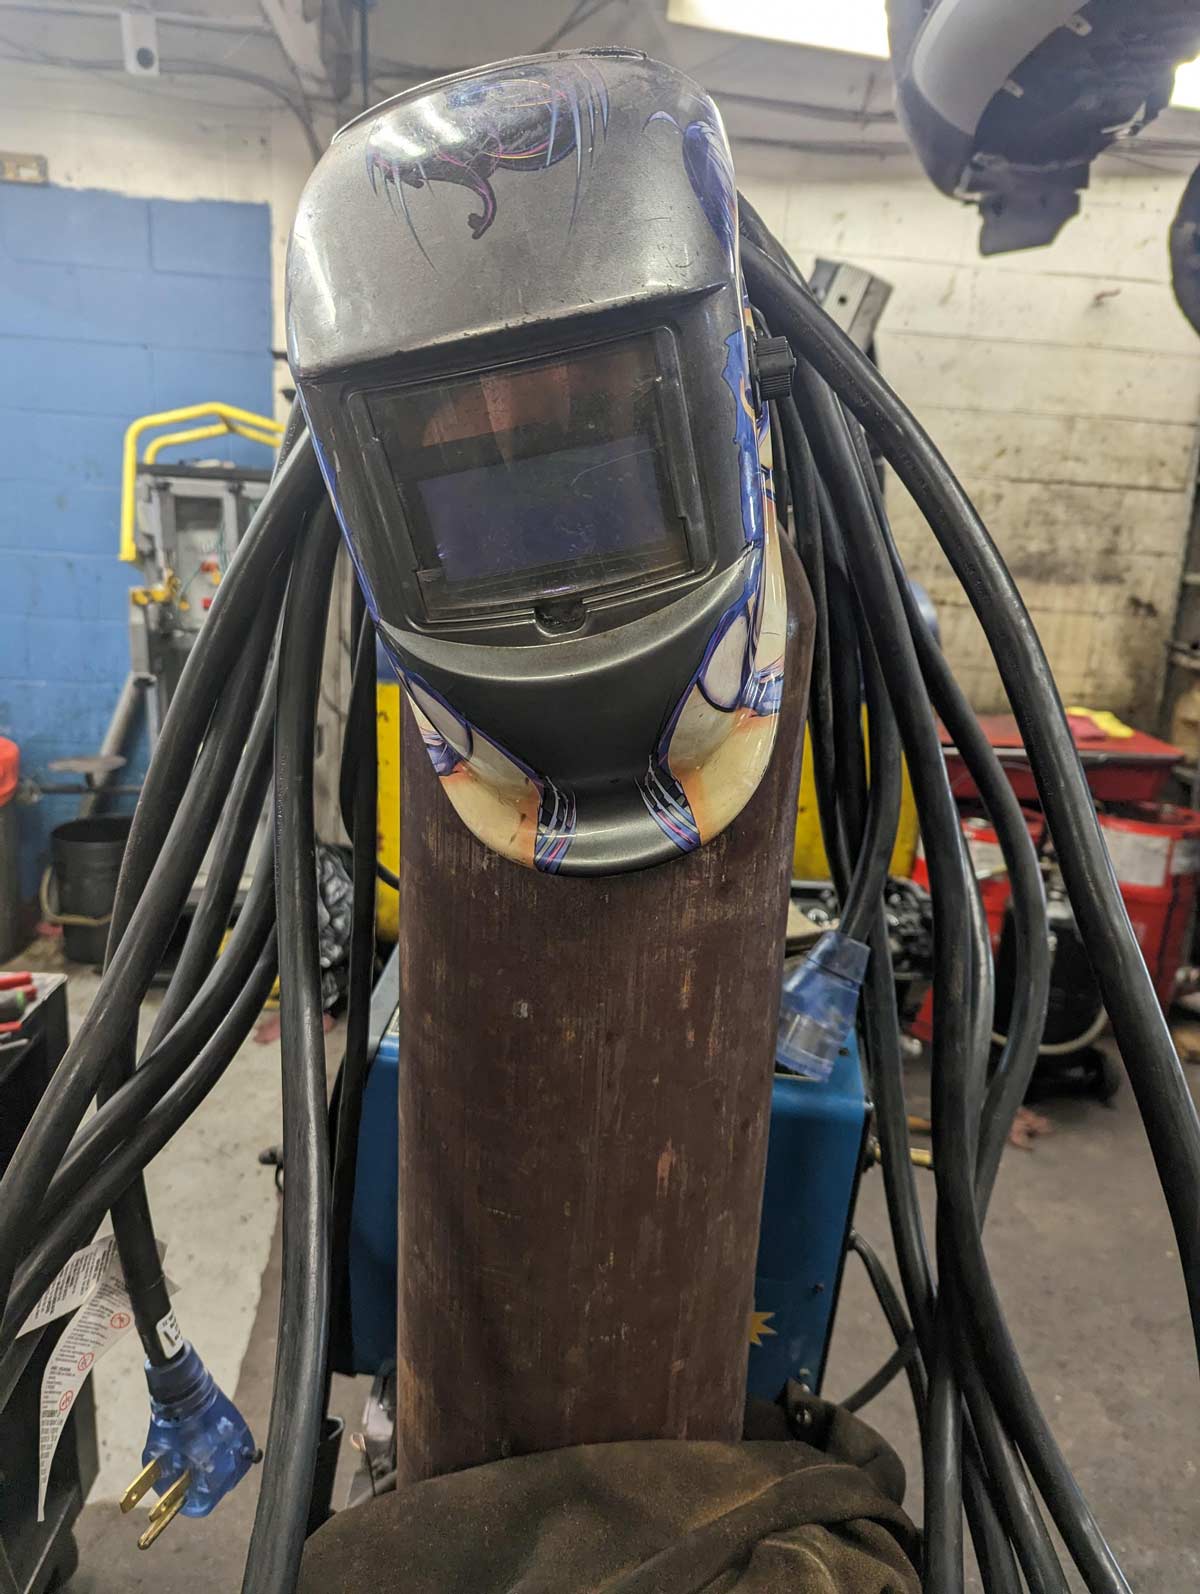 Our welder looks like predator if you see it out of the corner of your eye